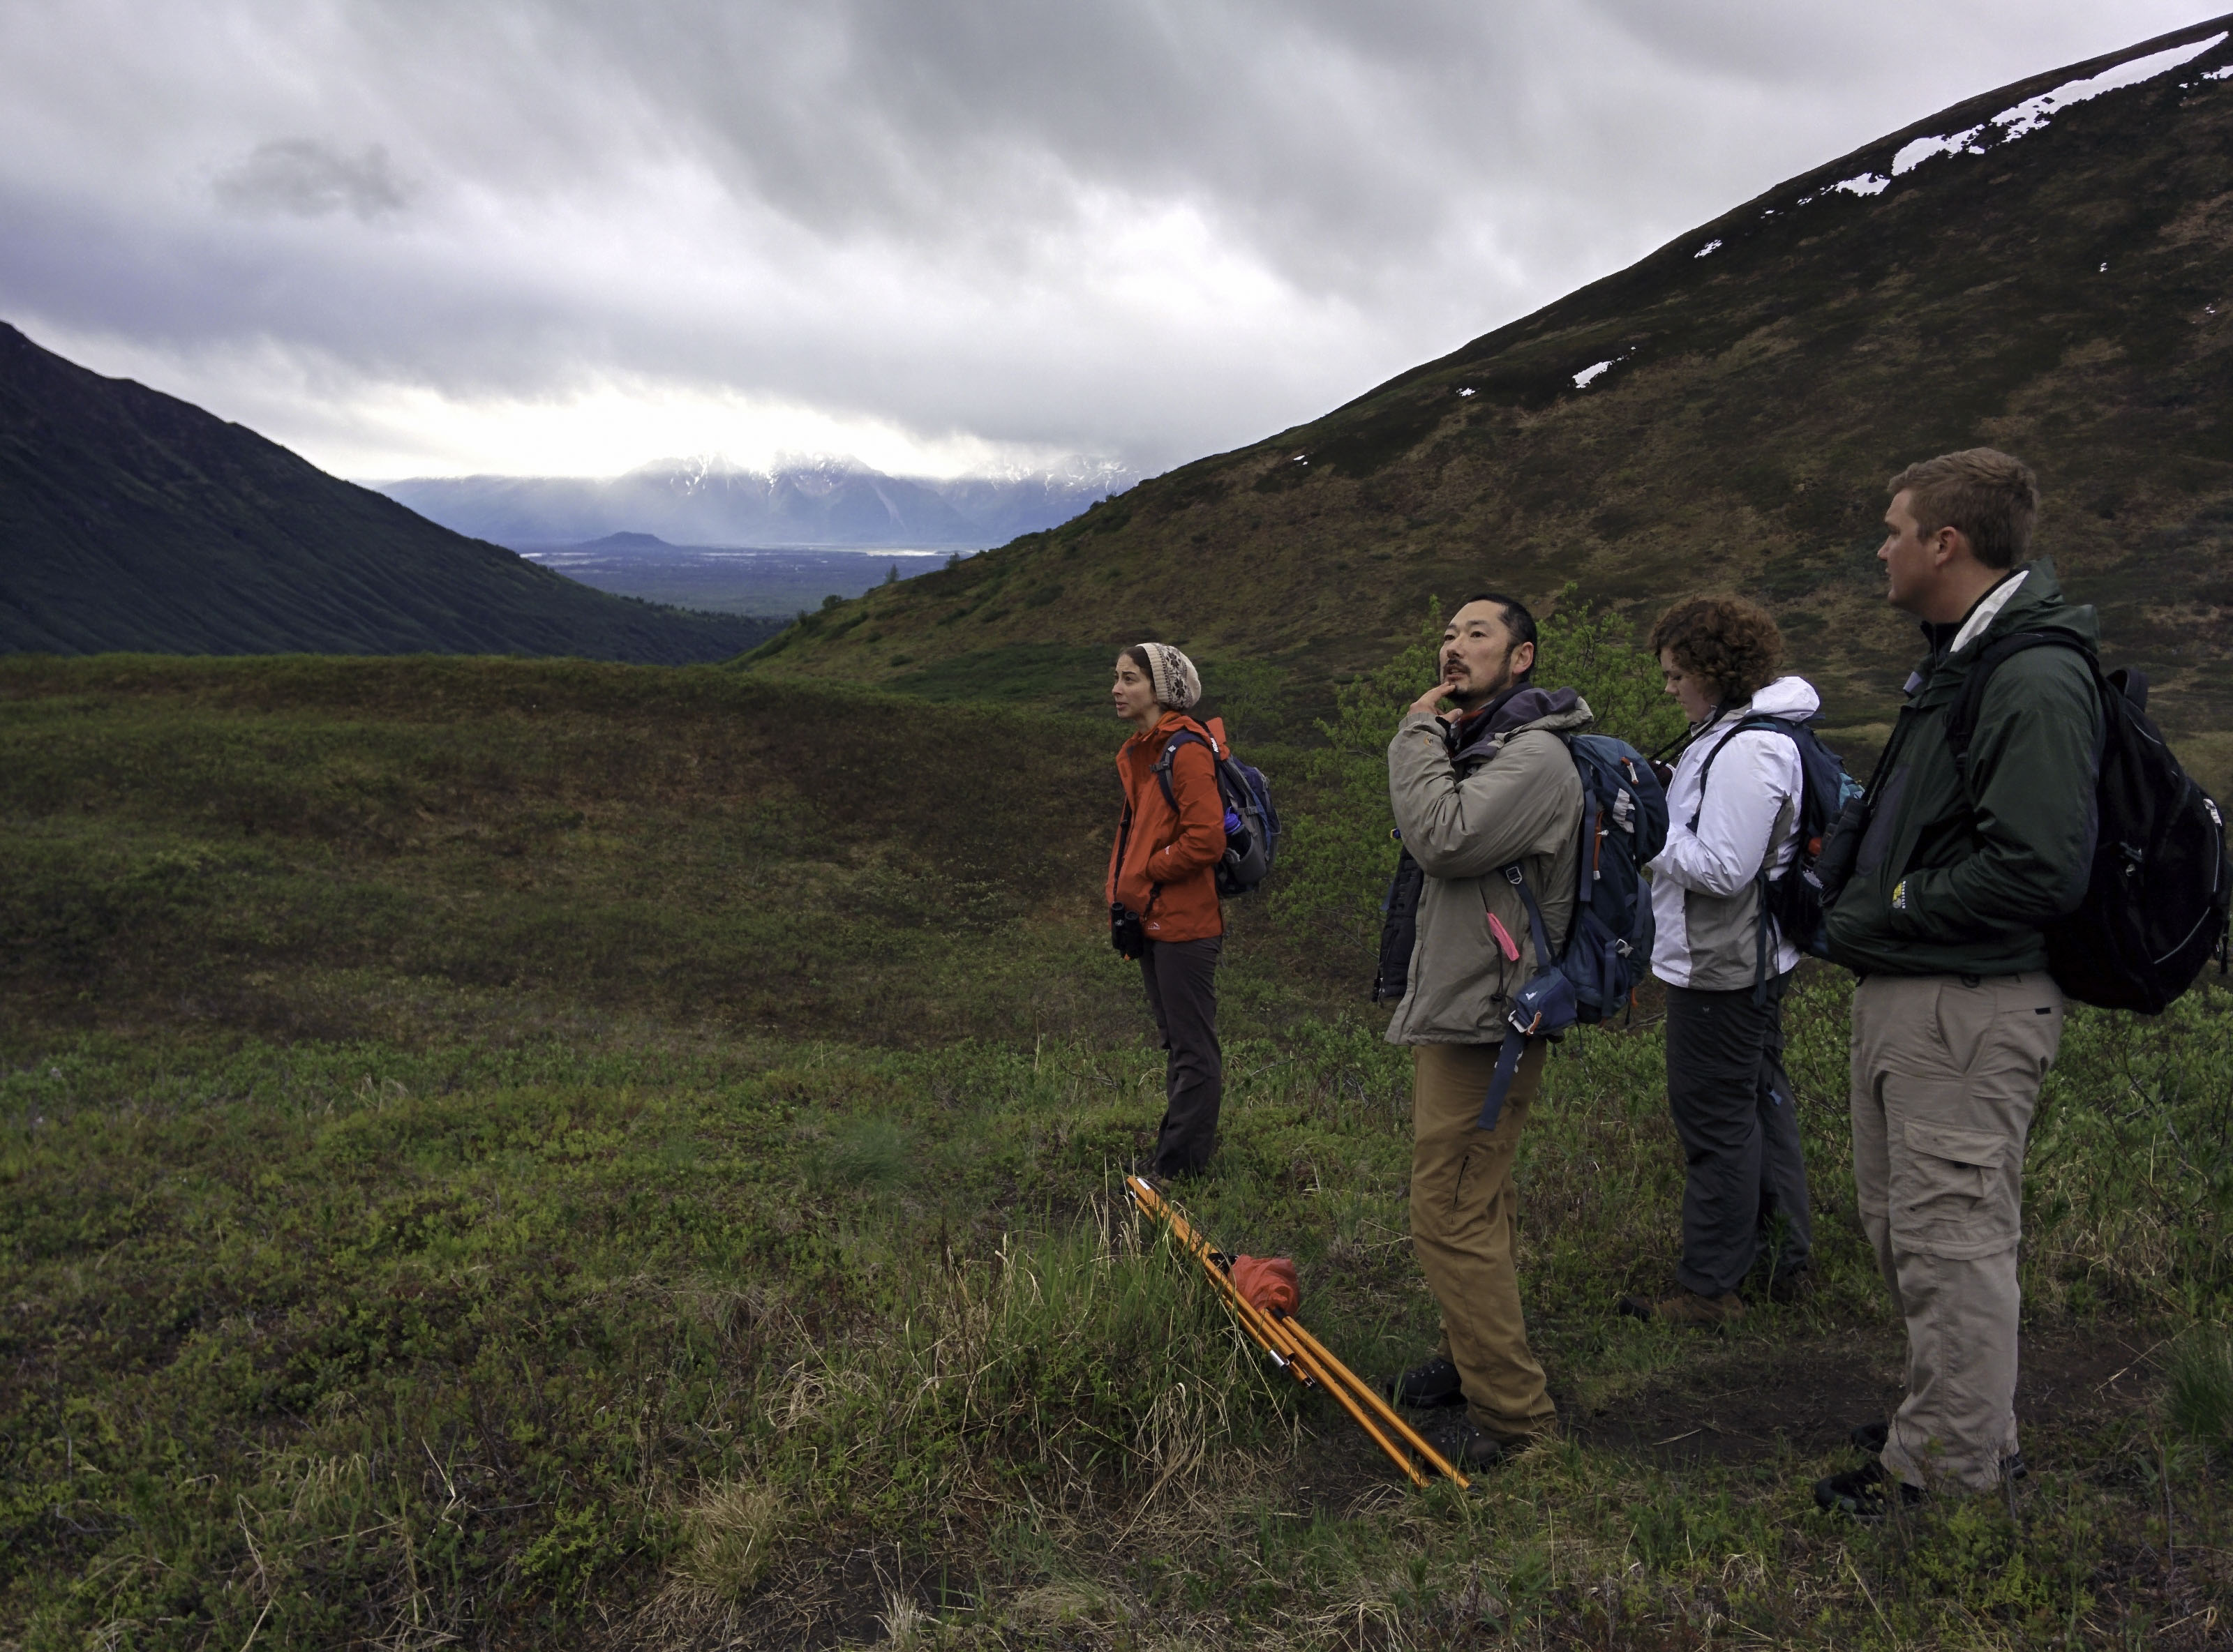 University of Nebraska-Lincoln biologists Emily Hudson (left), Daizaburo Shizuka (second from left) and their colleagues tracked golden-crowned sparrows to their nests in southern Alaska as part of a study into how sparrow chicks recognize their species' songs. The study found that week-old chicks, despite not yet learning their mating song, can distinguish that song from another sparrow species' based on its first note alone.